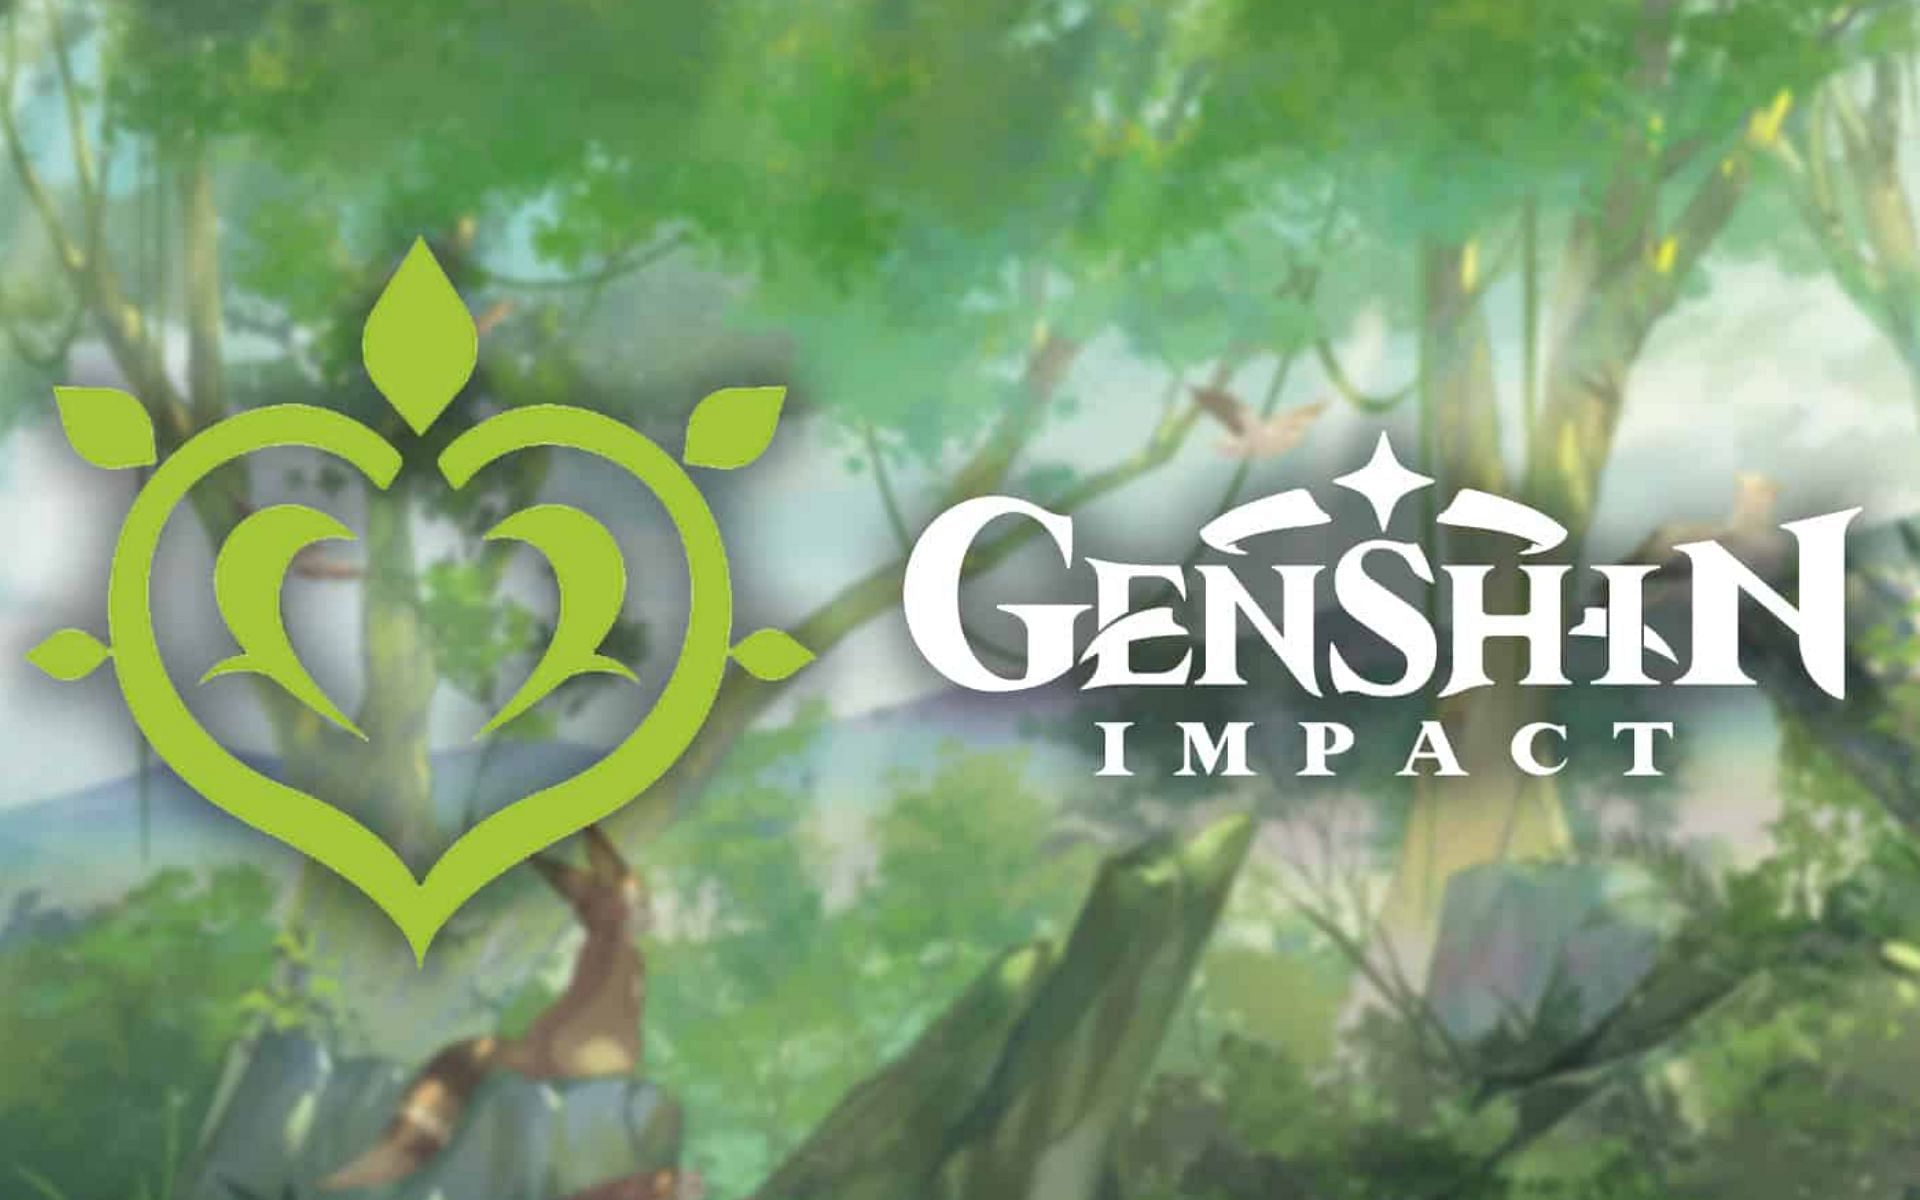 5 interesting facts about Sumeru in Genshin Impact